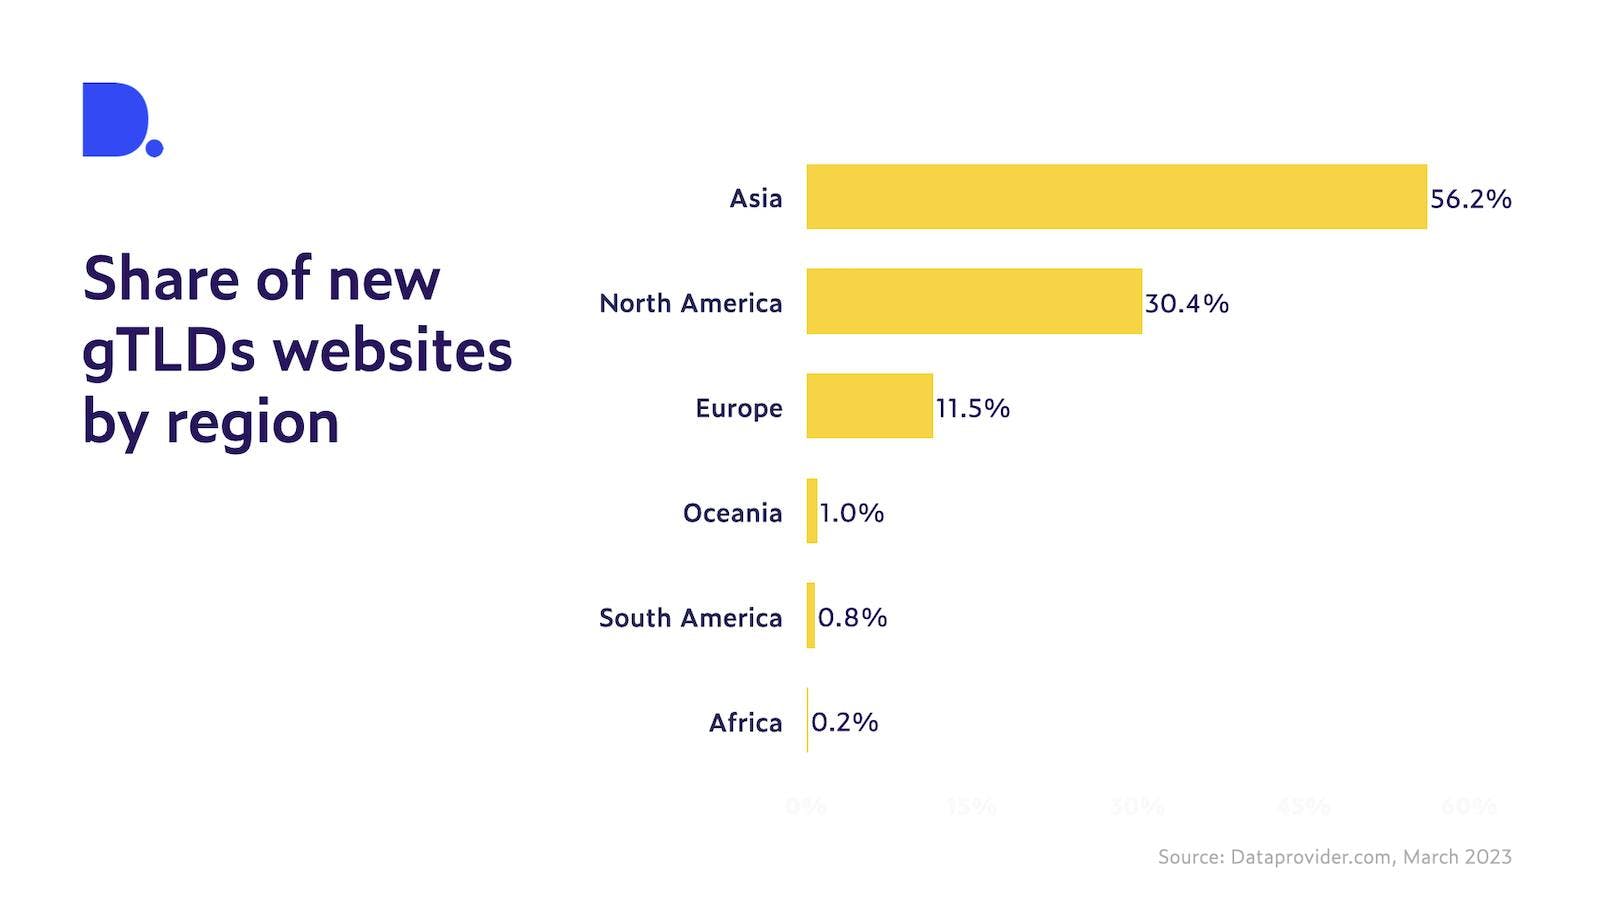 Geographic distribution of new gTLD websites